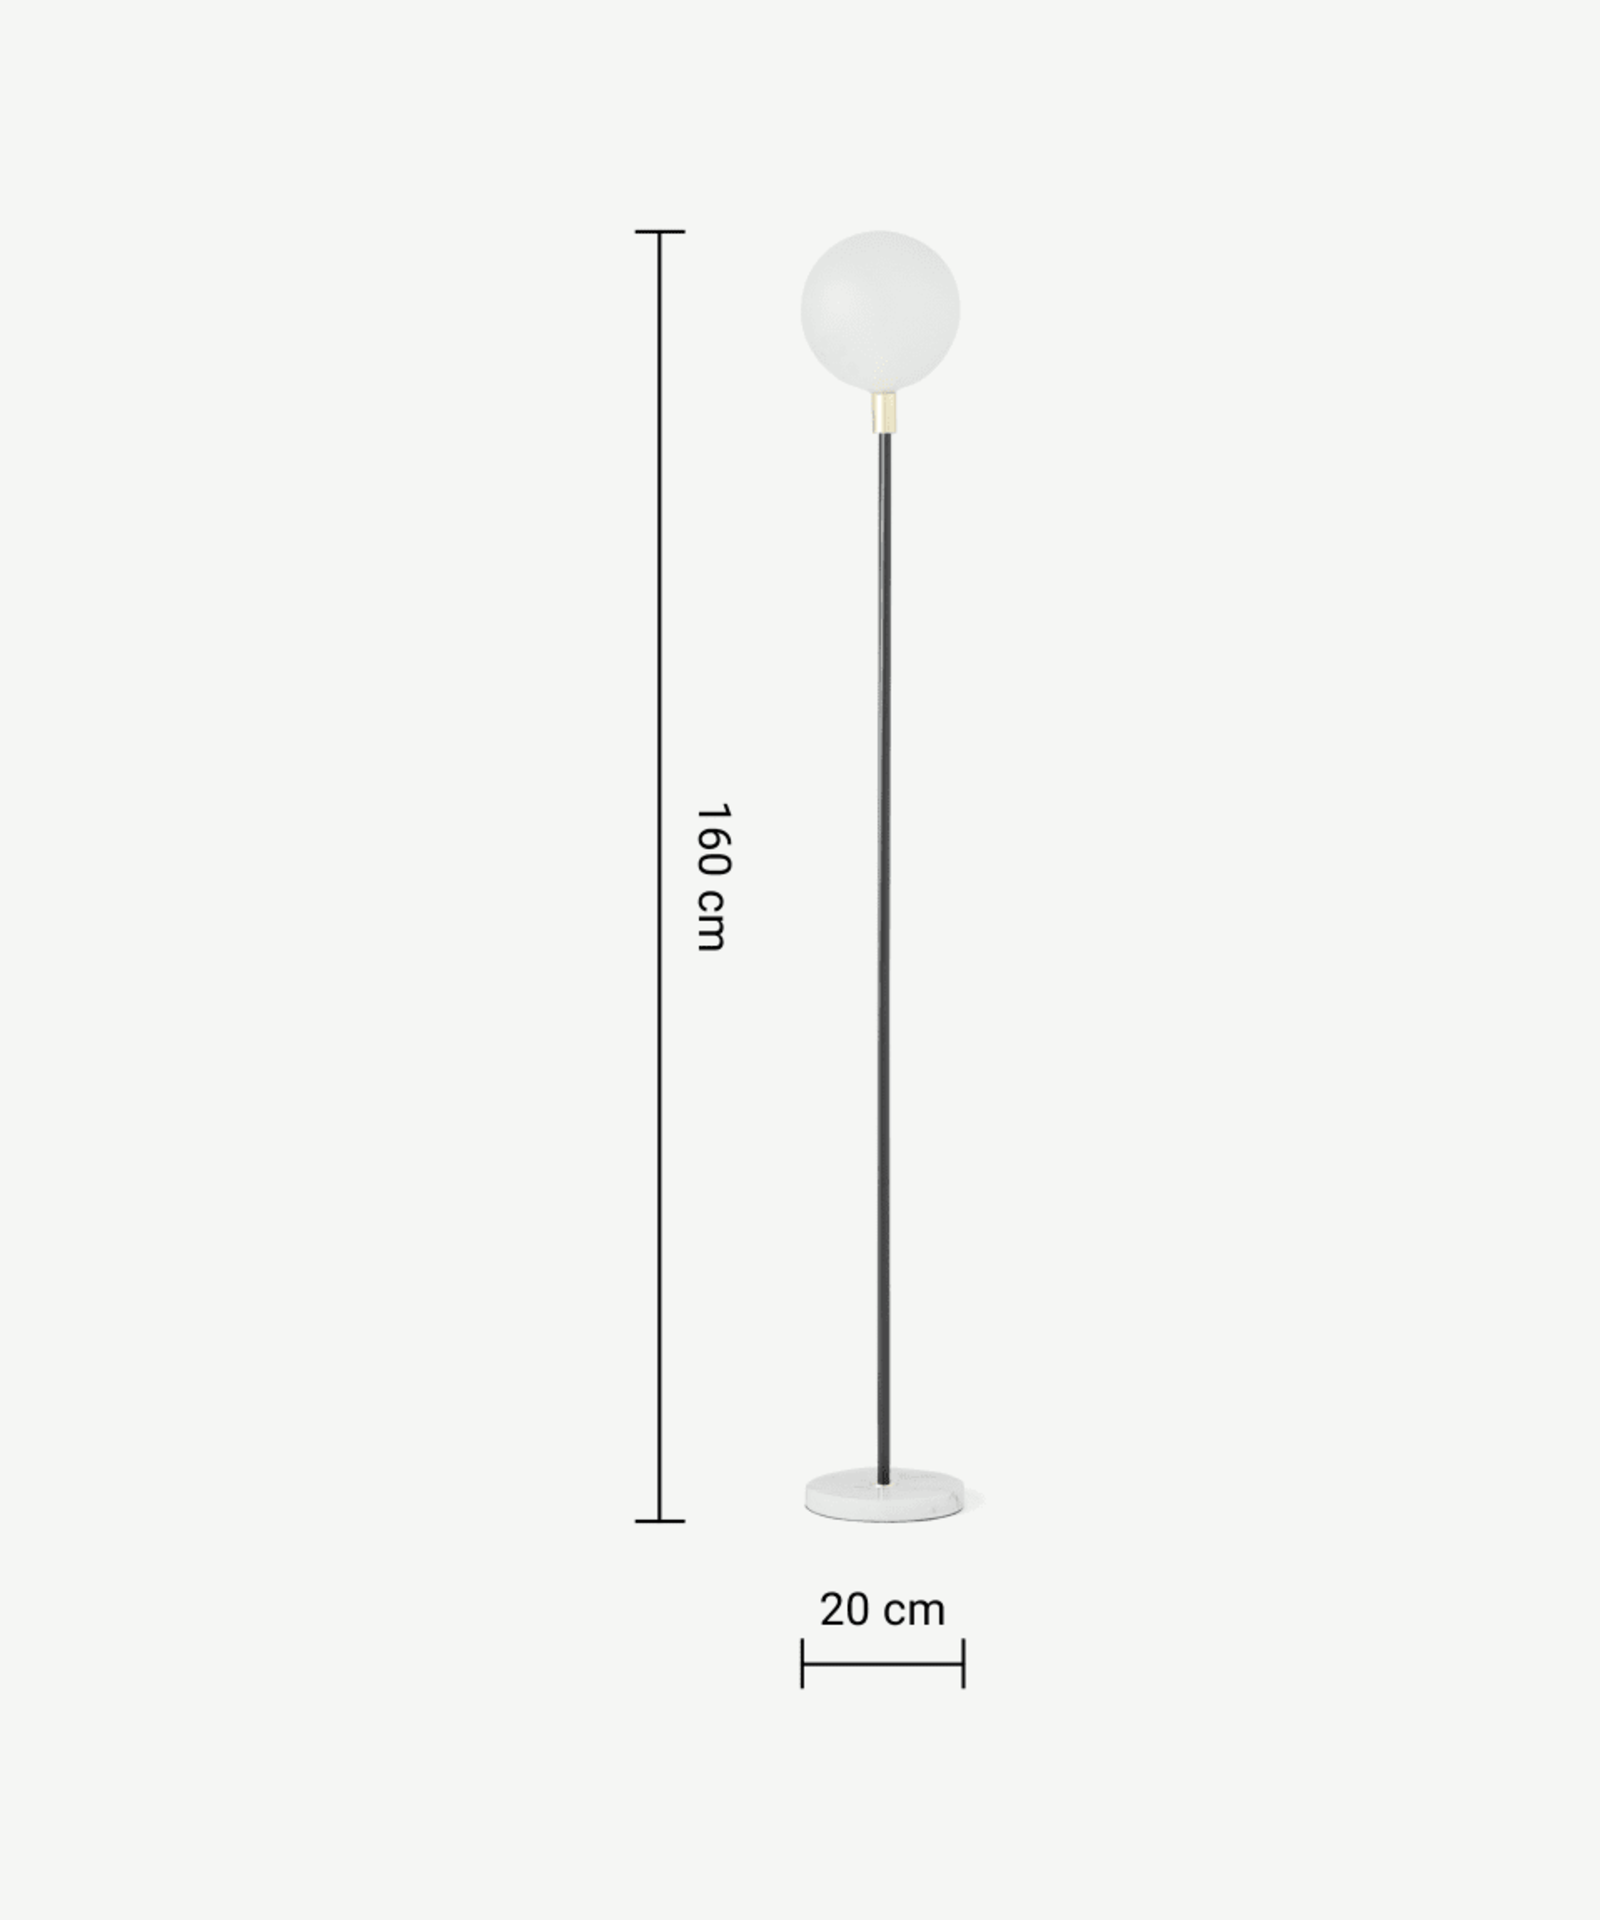 | 1x | Made.com Boll Floor Lamp White Marble Black & Frosted Glass | NO SHADE INCLUDED| RRP Â£89 |